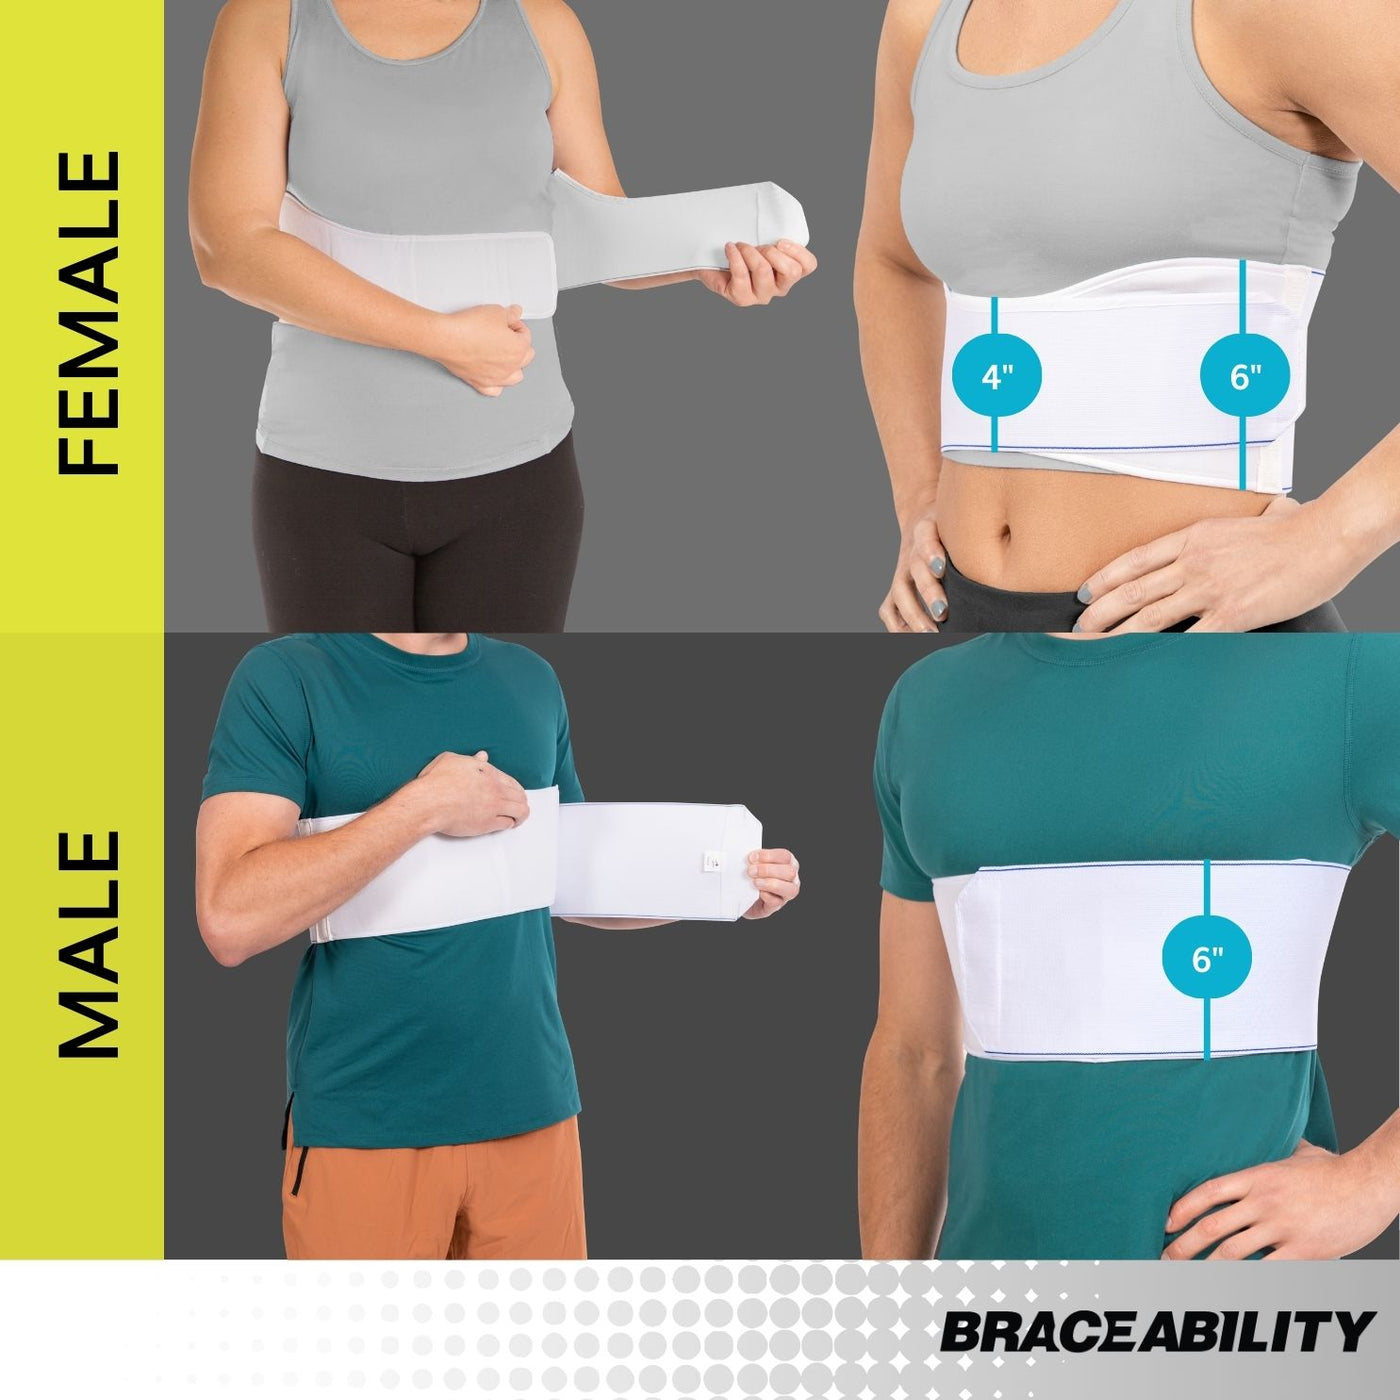 Rib binder for rib injuries is 6 inches tall and the female style has a 2 inch cutout to accommodate the breasts